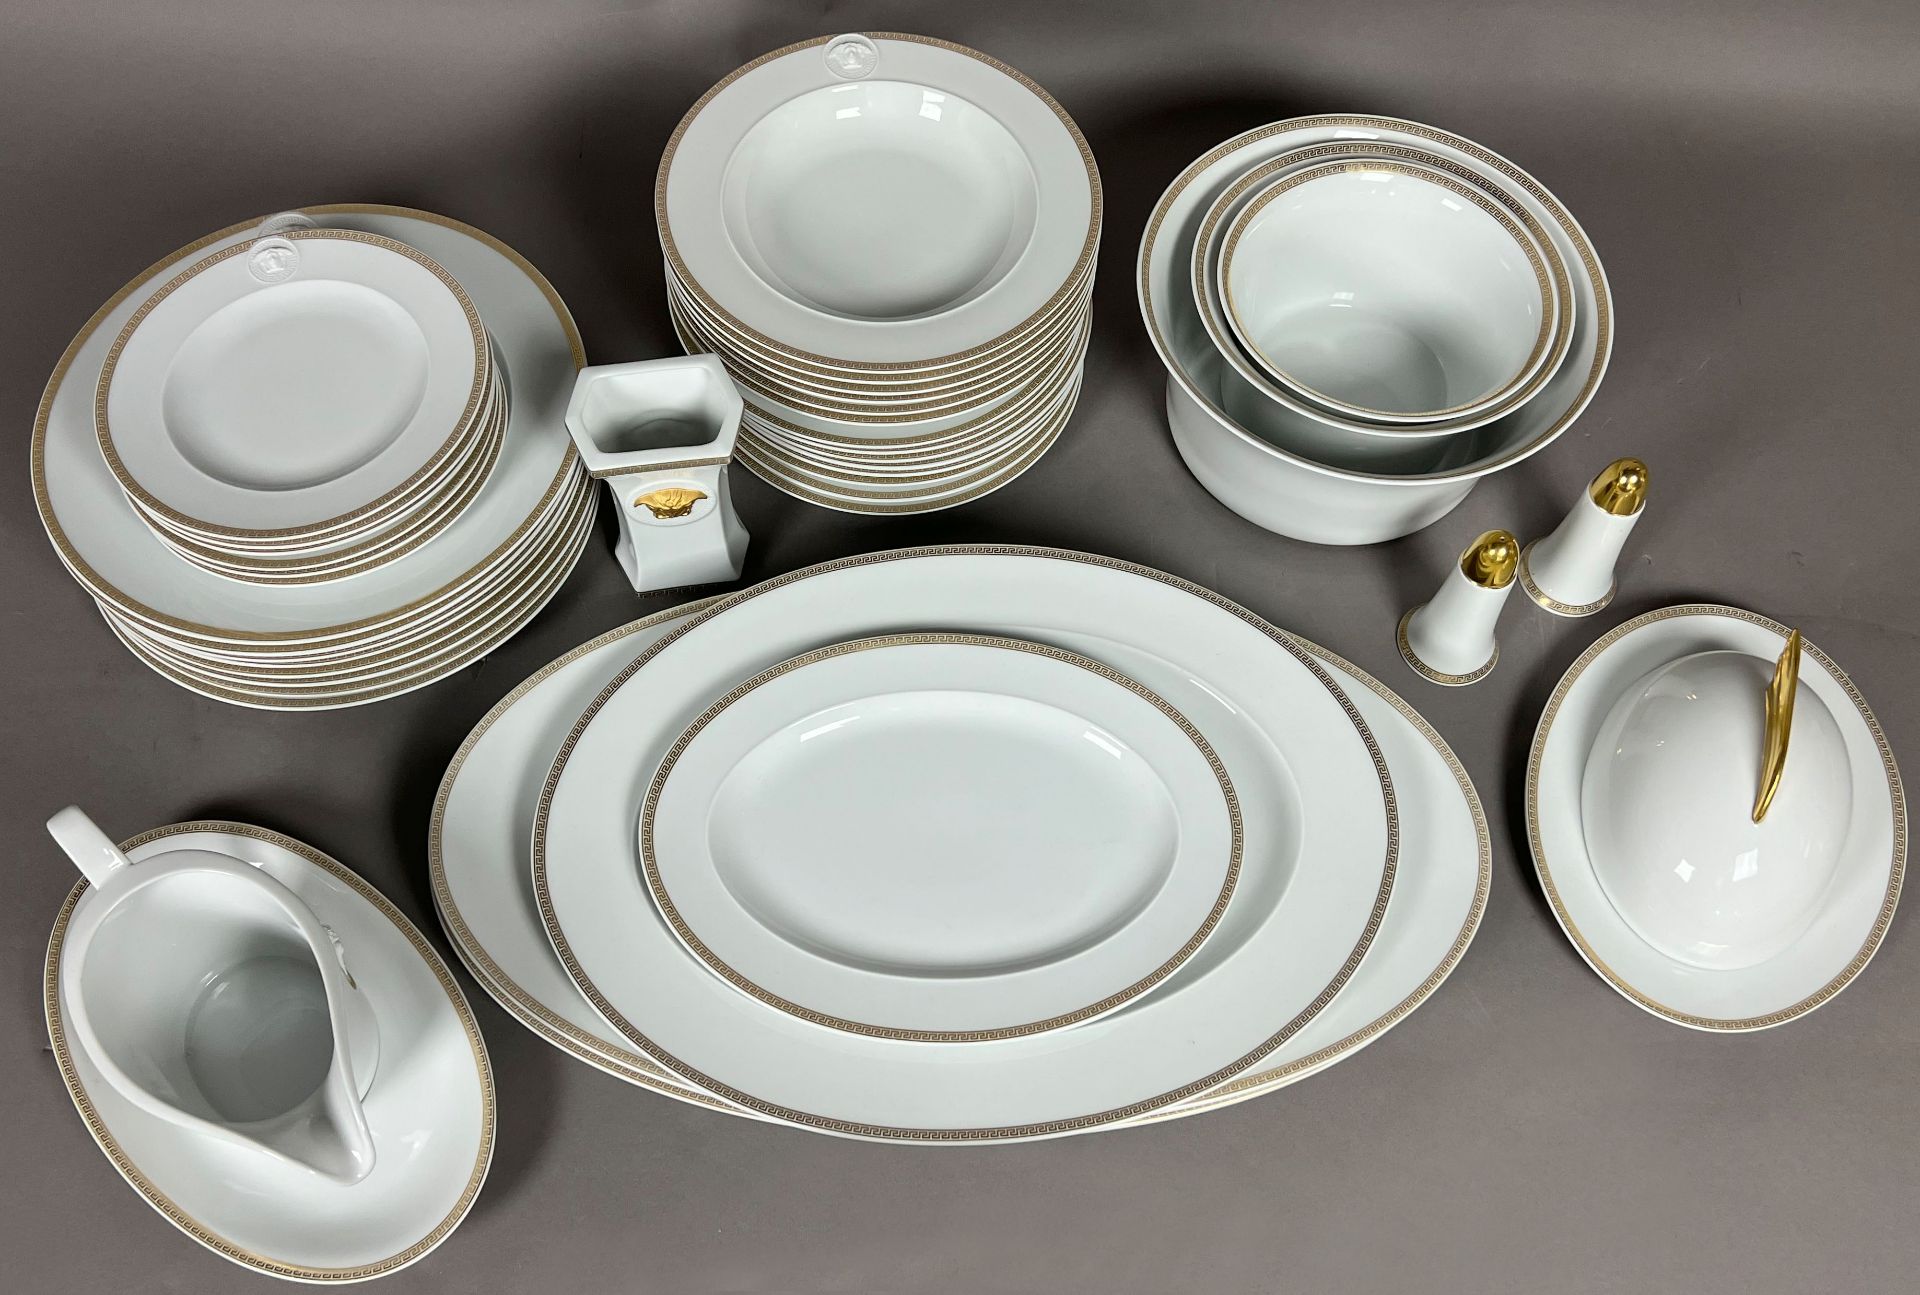 VERSACE by ROSENTHAL. 41-teiliges Speiseservice. Ikarus. "Medaillon Meandre D'Or". - Bild 4 aus 10